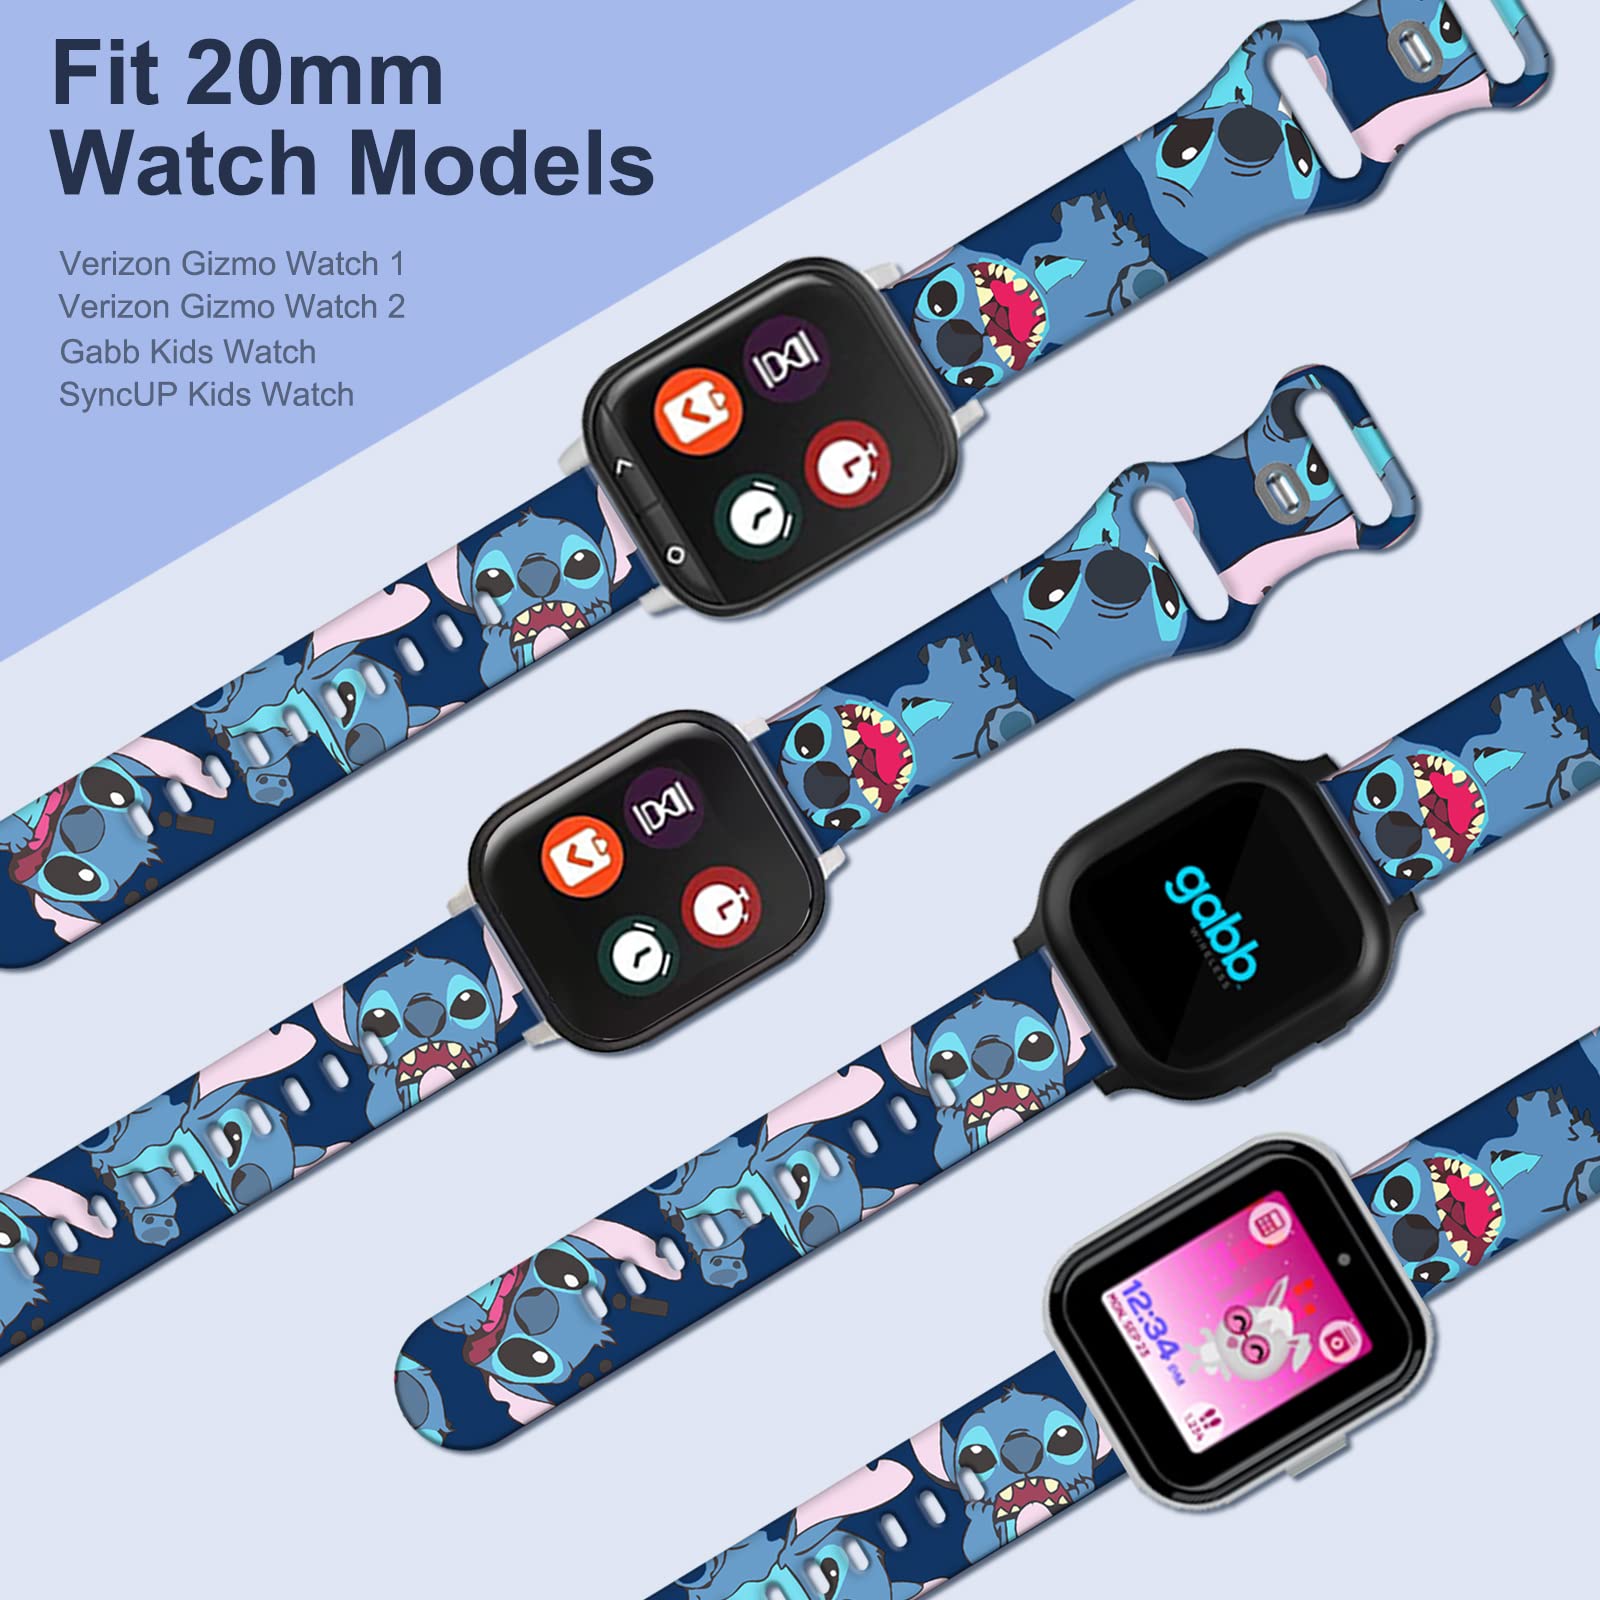 Cartoon Printed Bands for SyncUP Kids Watch Band Replacement, 20mm Chic Cute Strap Compatible with T-Mobile SyncUP Kids Watch Silicone Sport Wristbands for Boys Girls